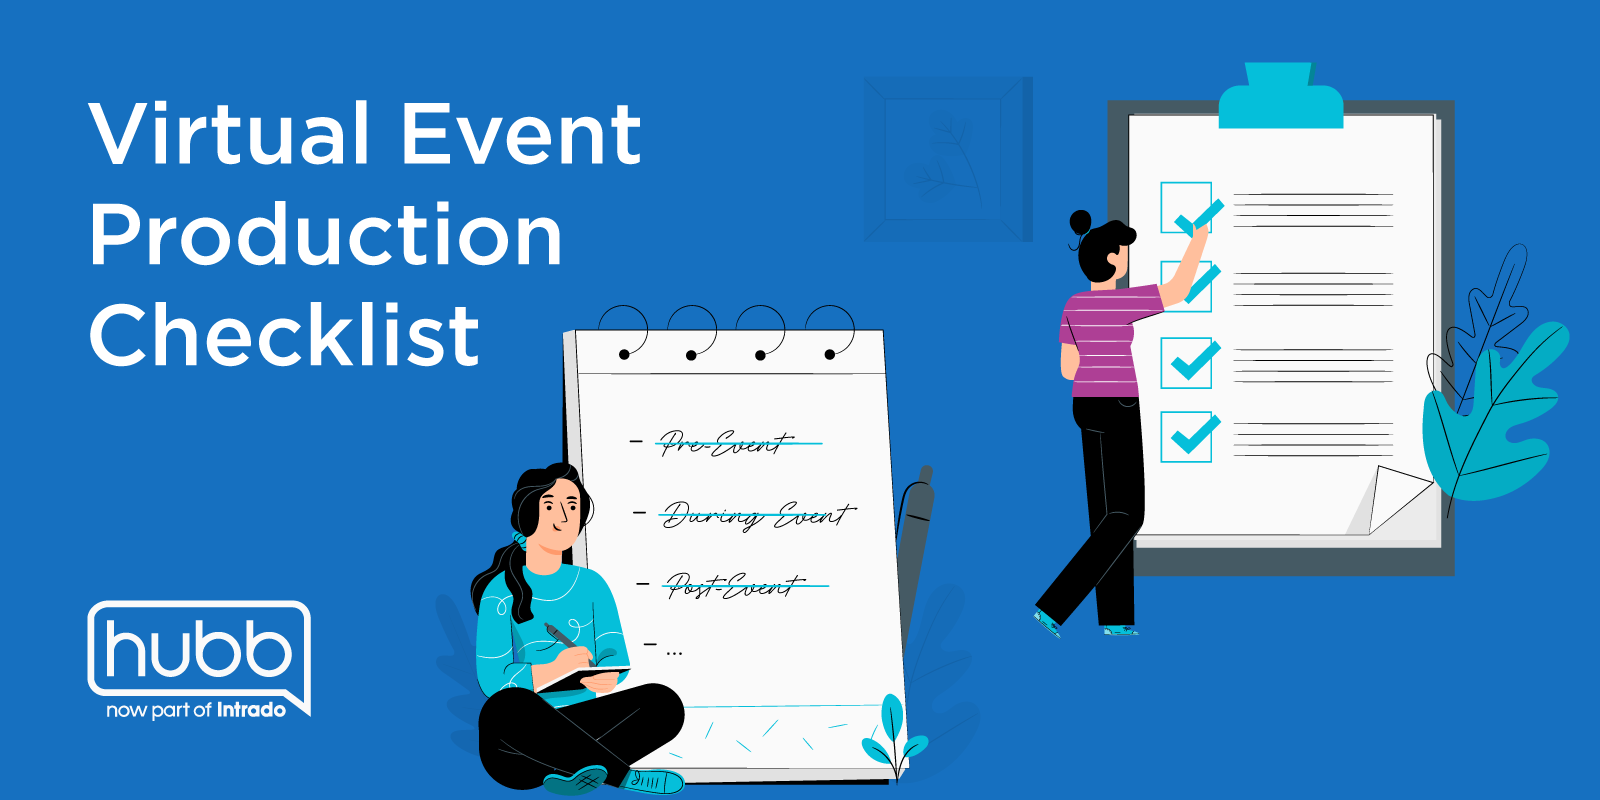 A Checklist for Testing Your Digital Event